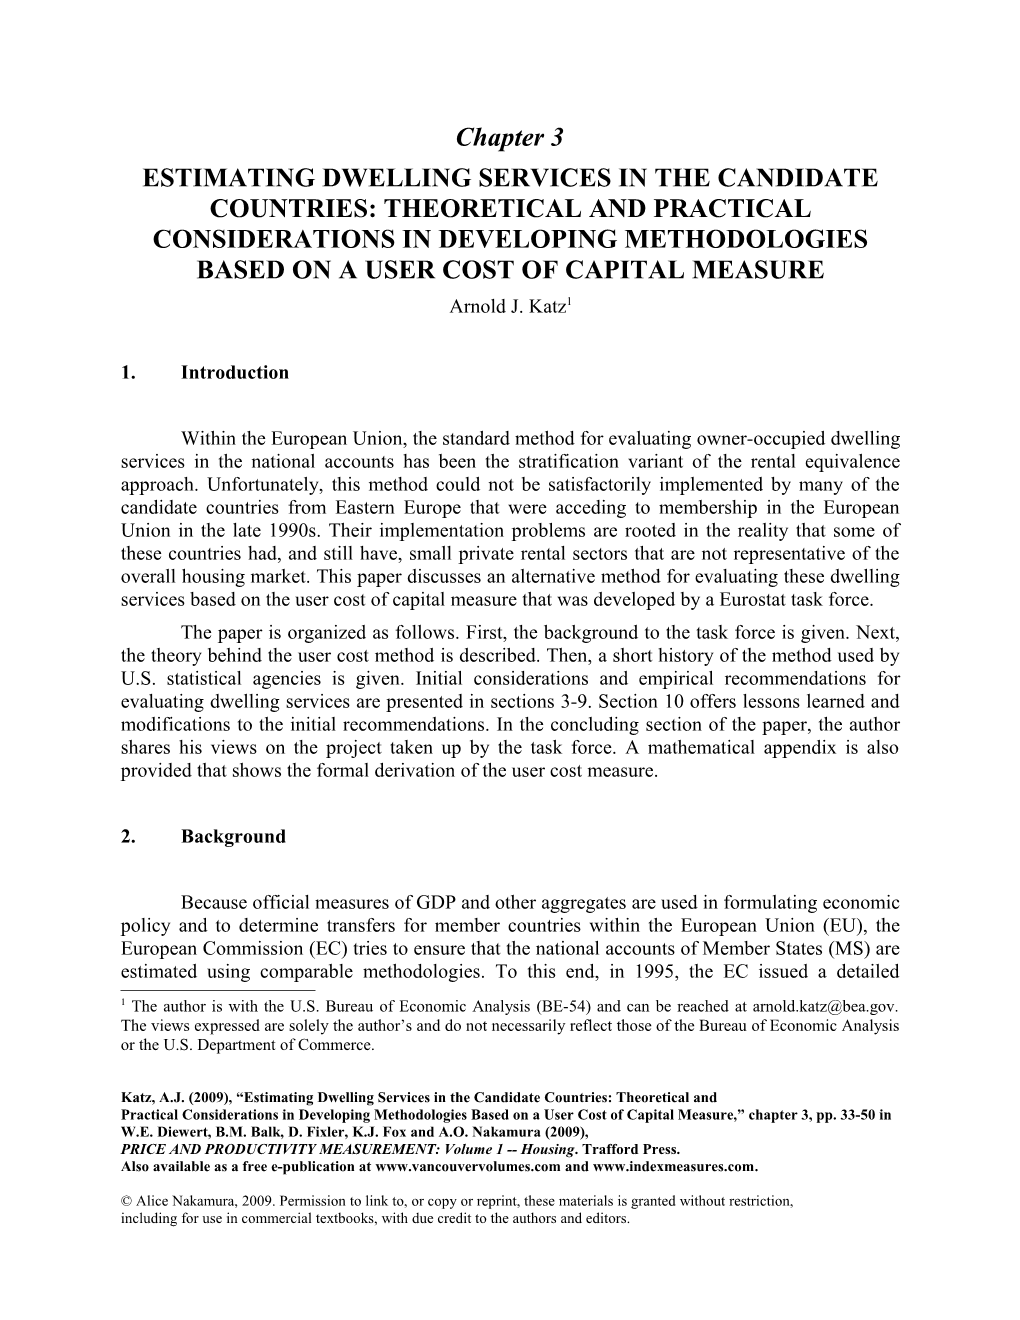 Estimating Dwelling Services in the Candidate Countries: Theoretical and Practical